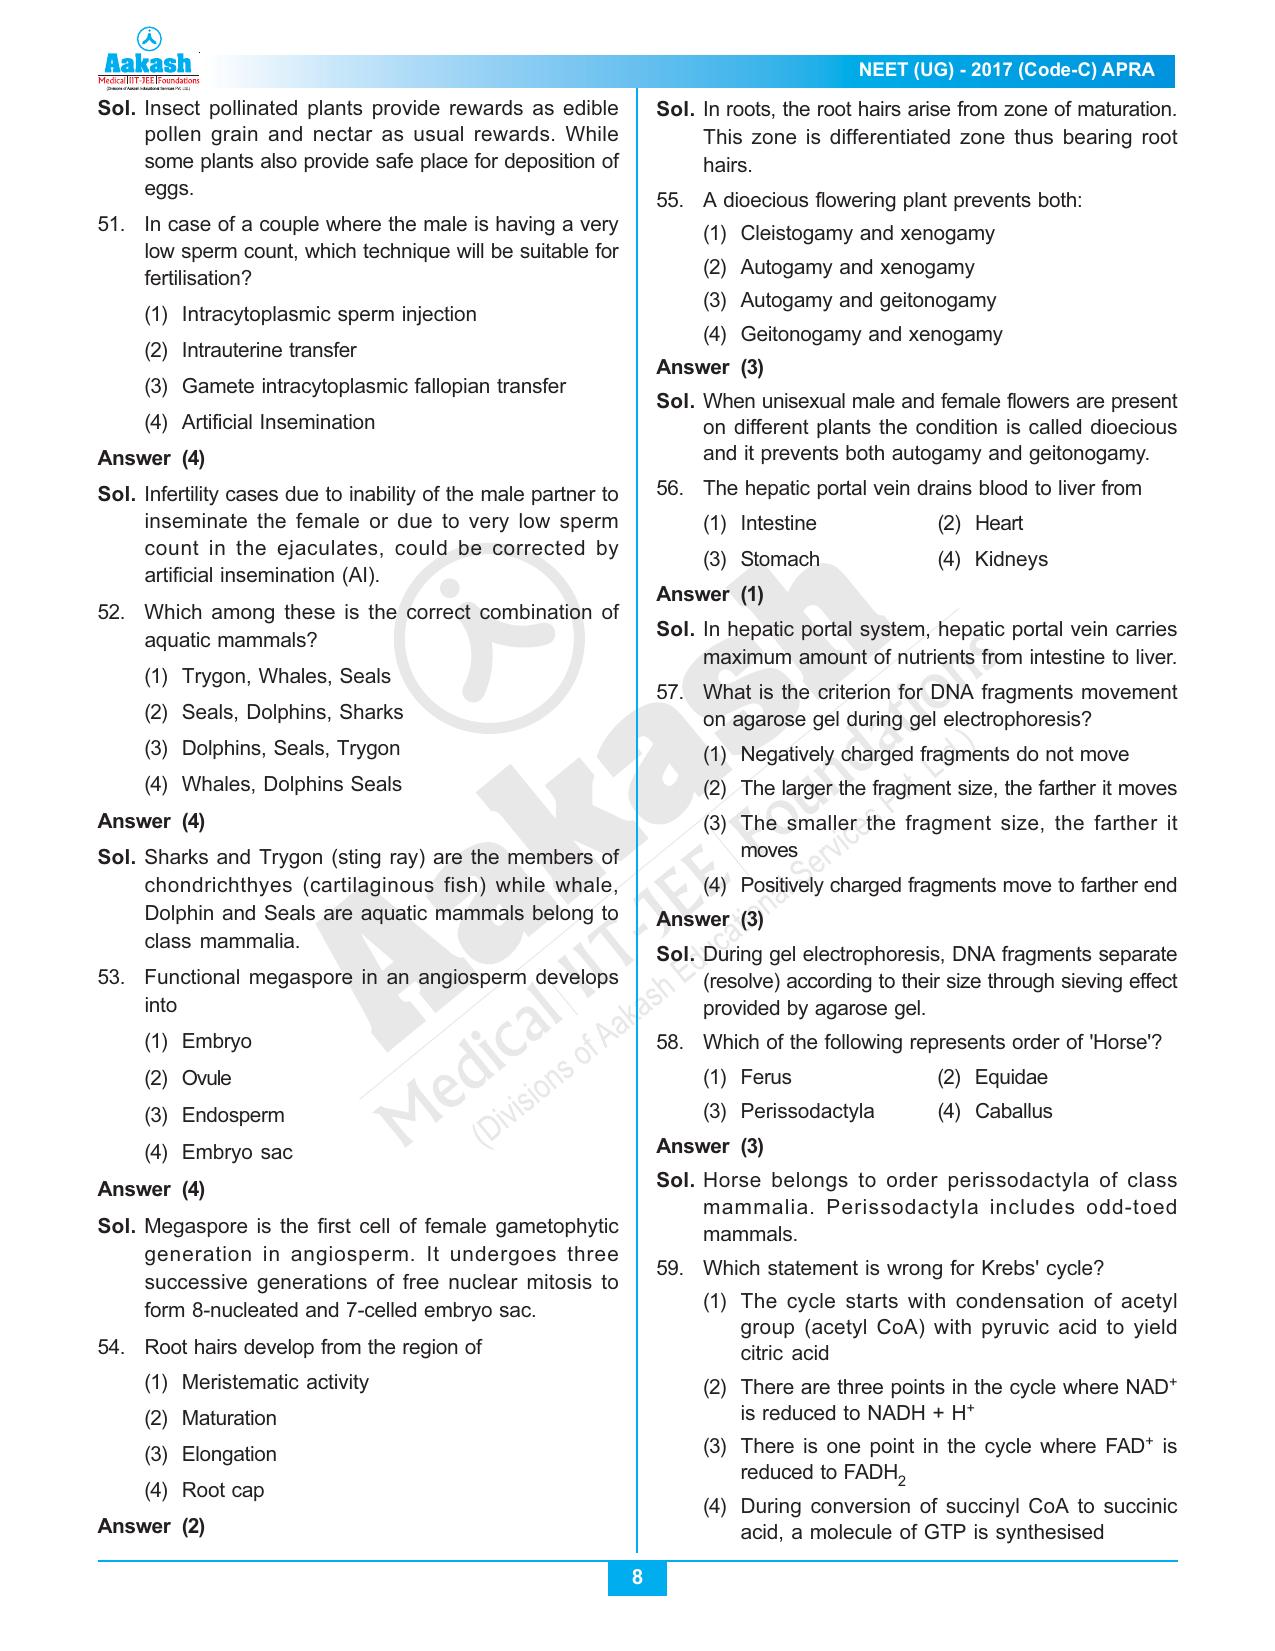  NEET Code C 2017 Answer & Solutions - Page 8